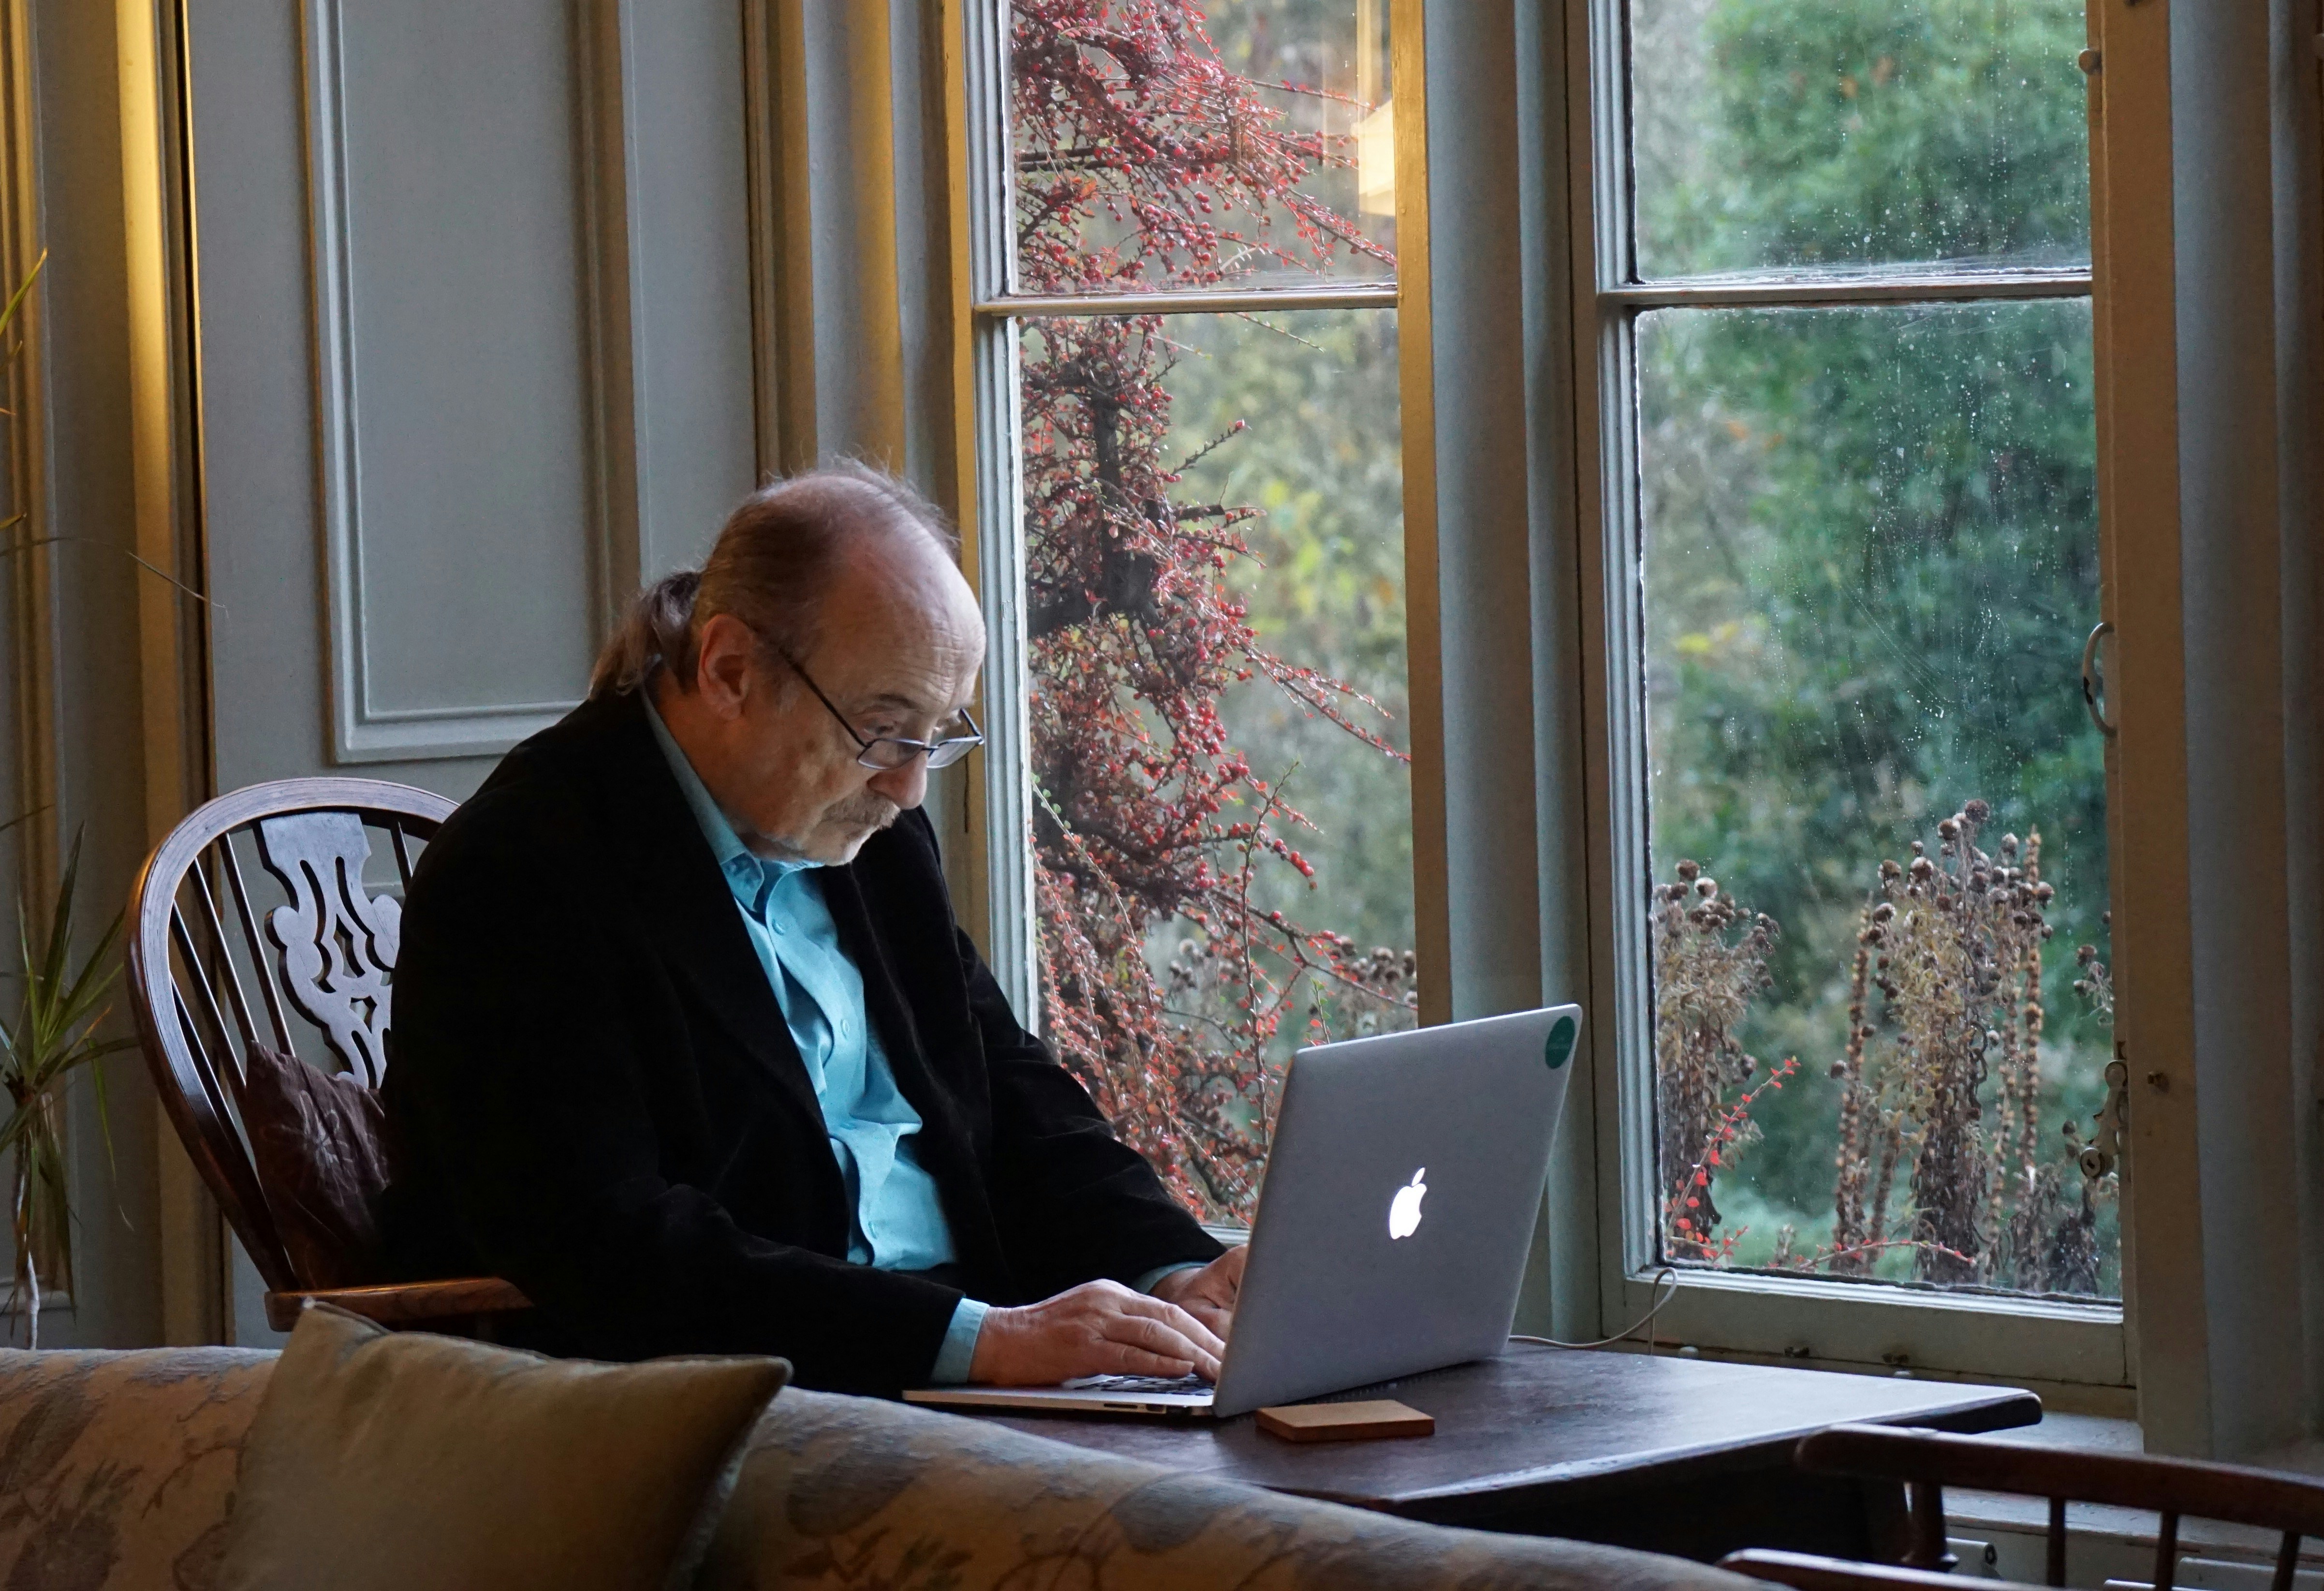 Elderly man sitting on a chair using a laptop on a table inside a house.